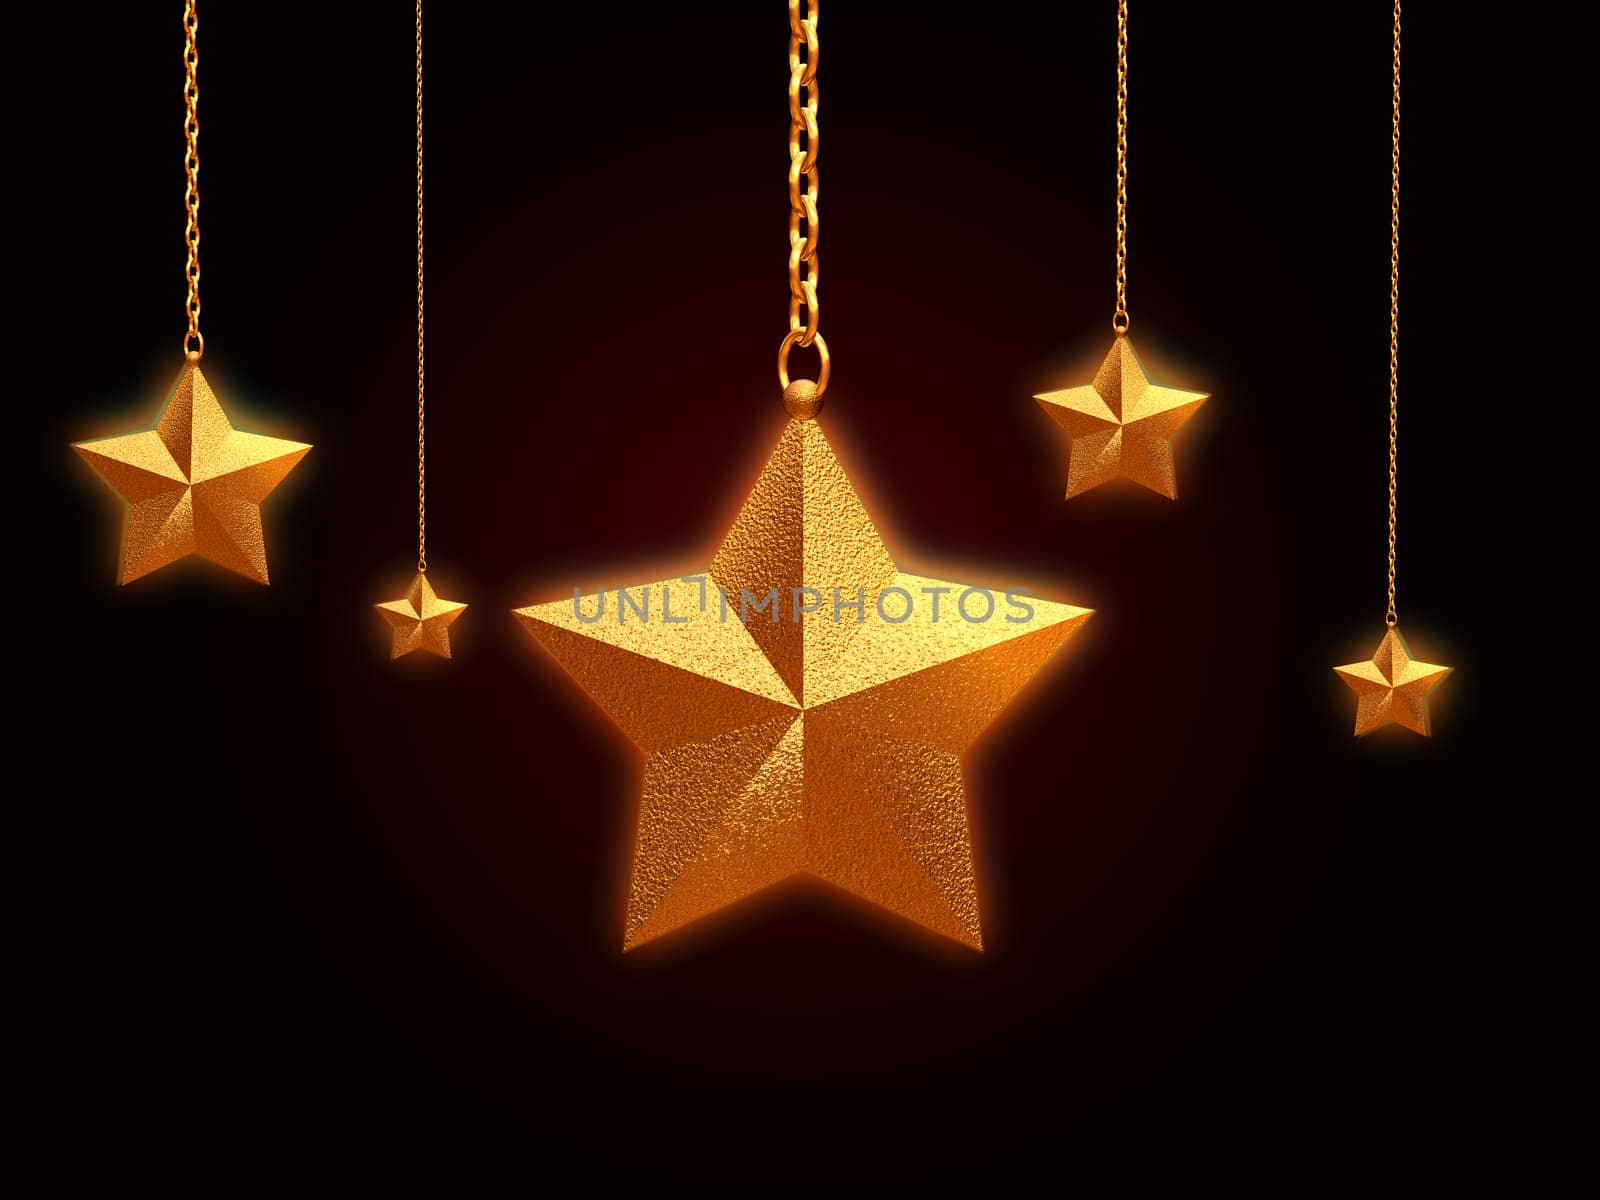 3d golden stars with chains over black background